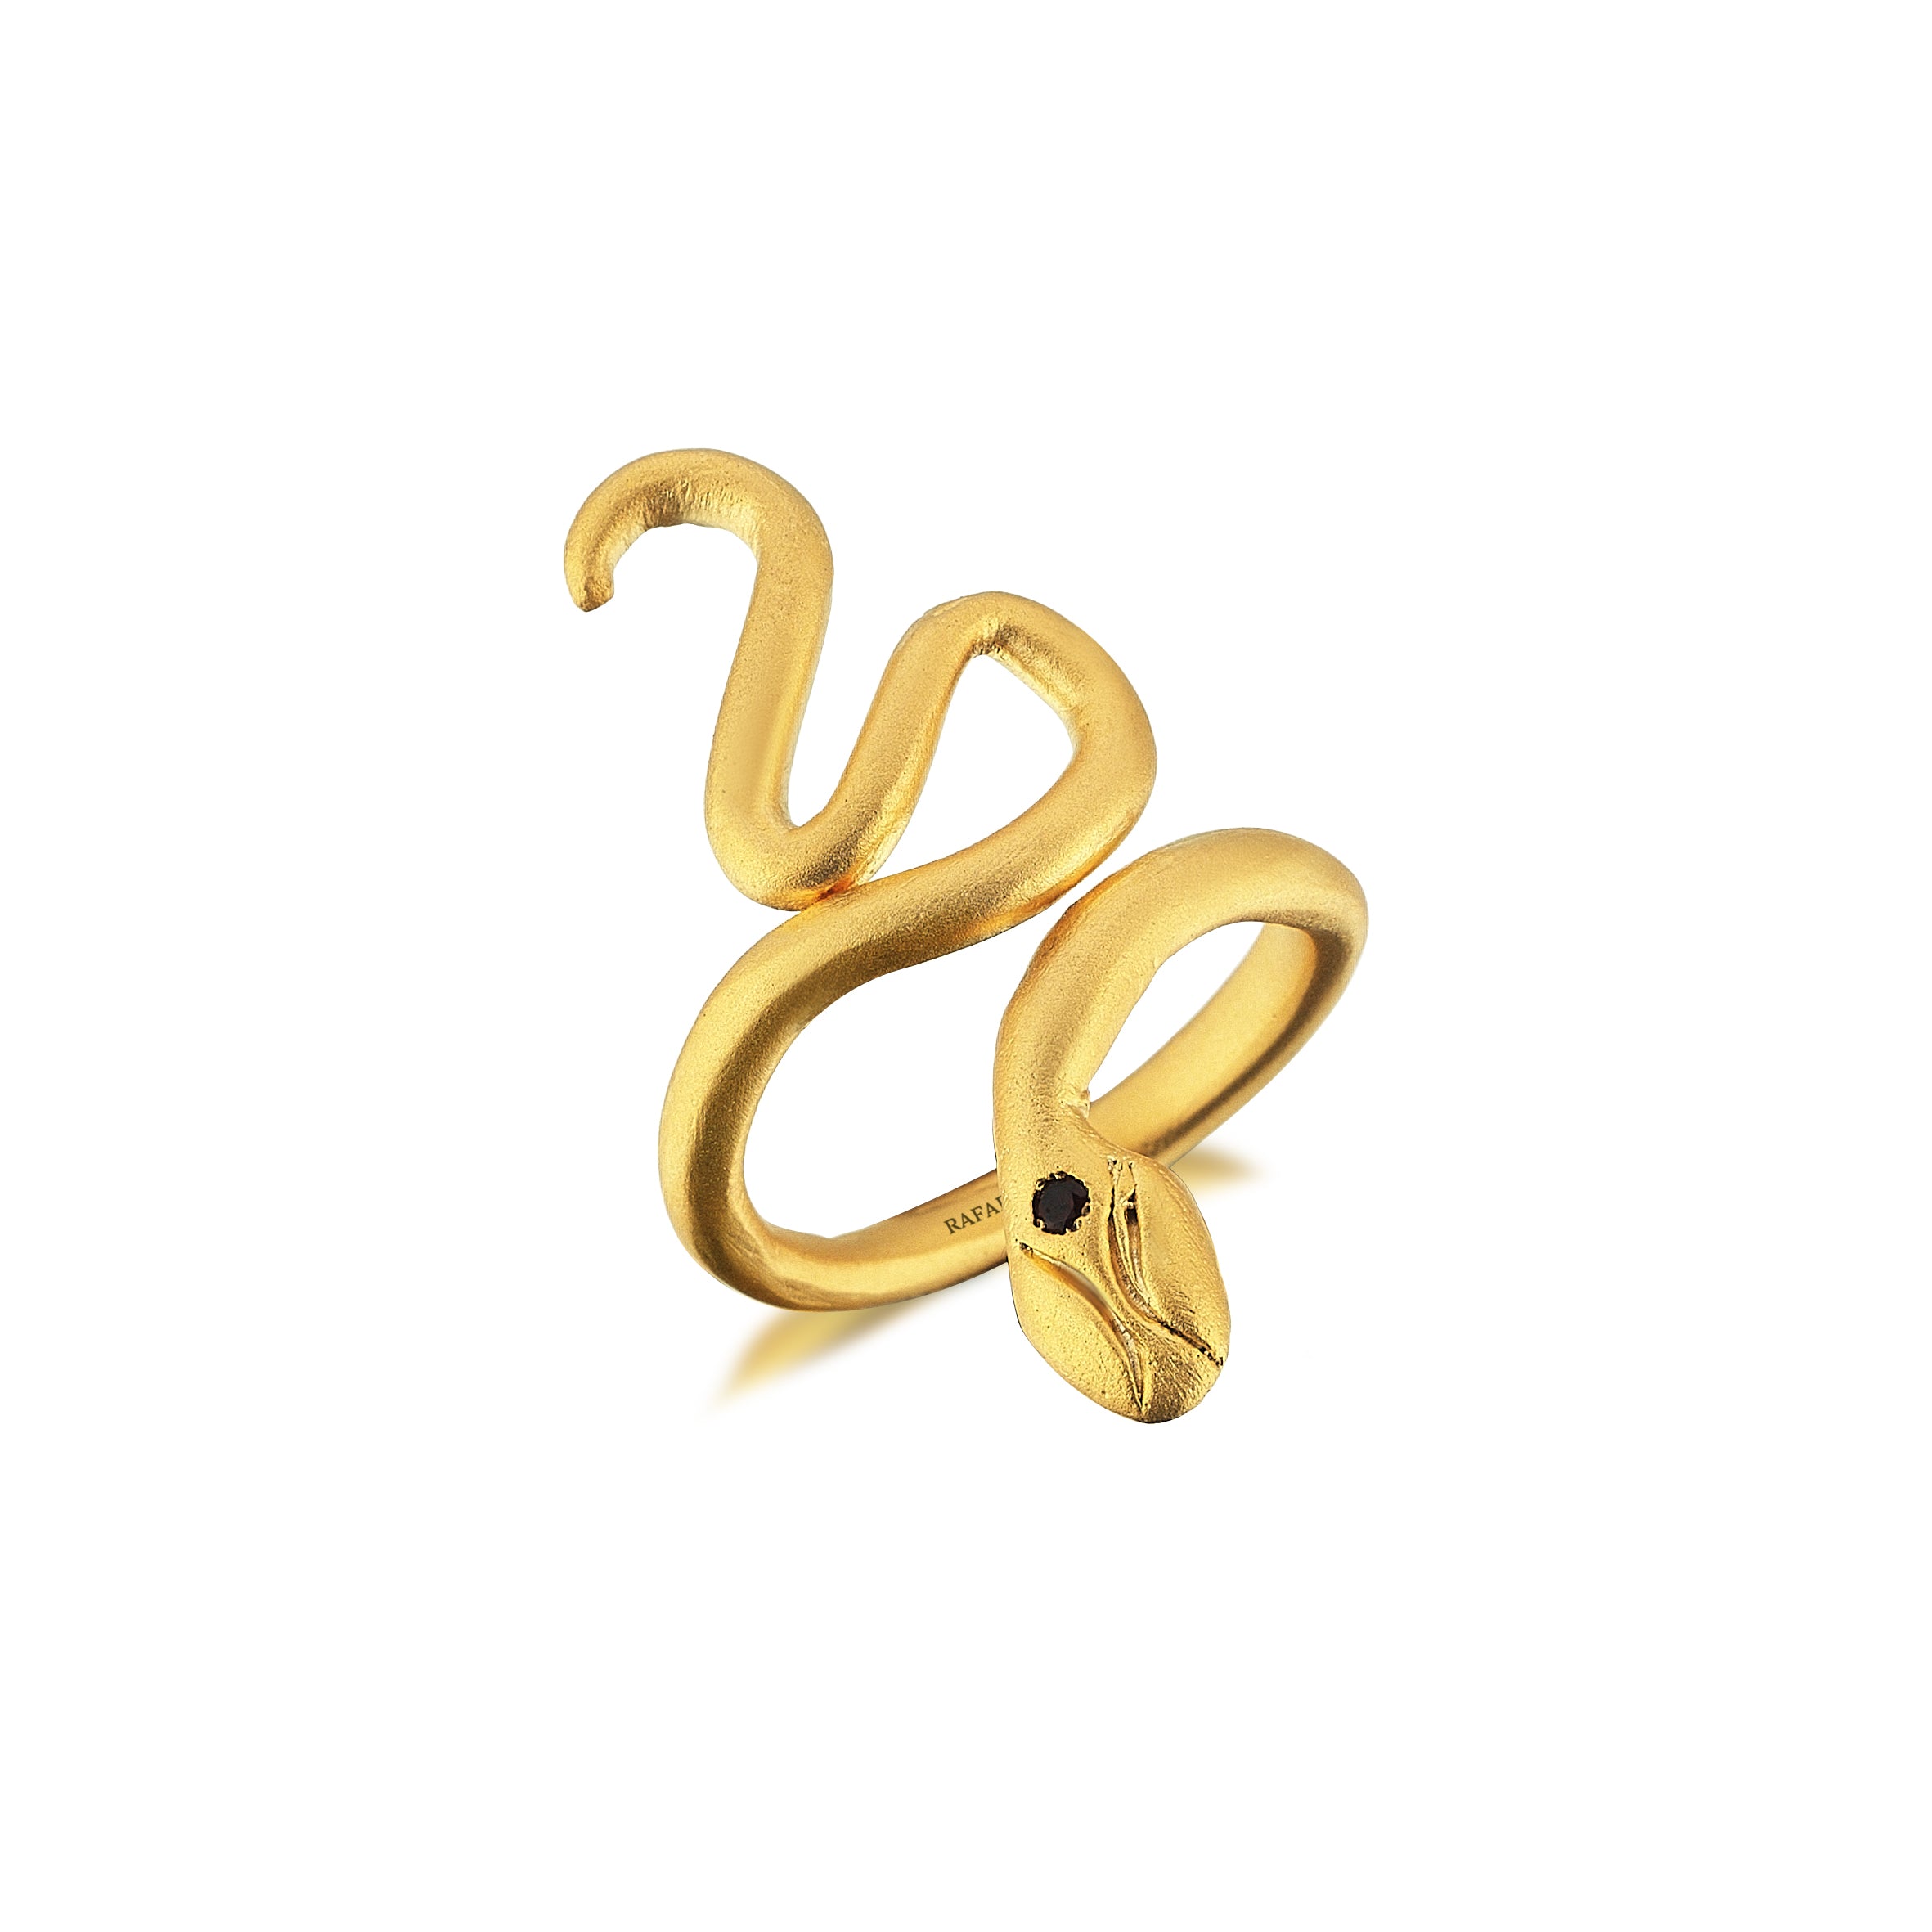 THE SECOND SNAKE RING